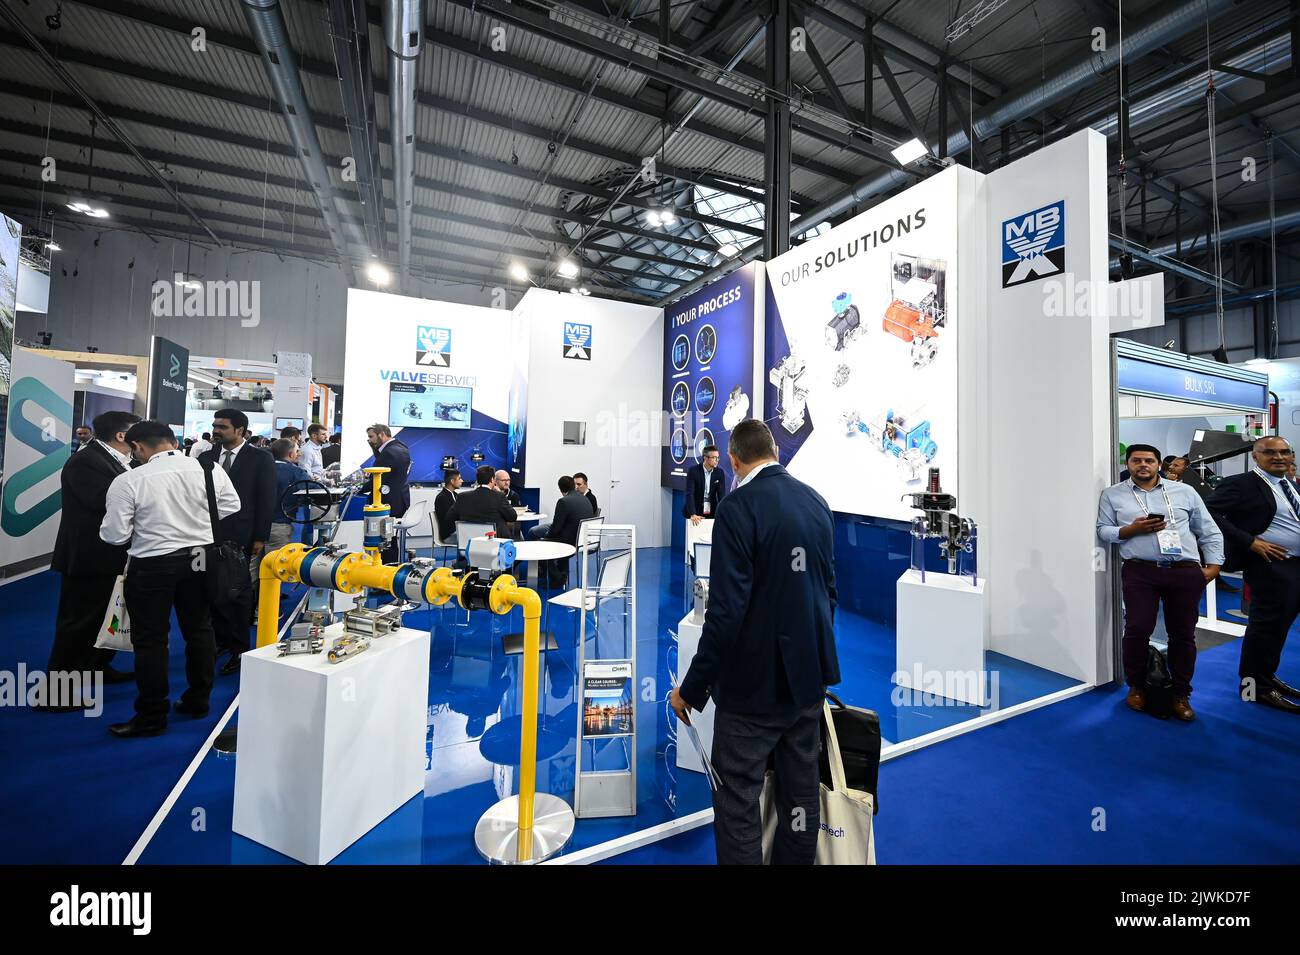 MILAN, ITALY - SEPTEMBER 6, 2022: a view of the MB Valveservice stand during Gastech 2022 trade show event in Milan Fair. Visitors and people in the hall walk through exhibitors stands and exhibit booths. Stock Photo